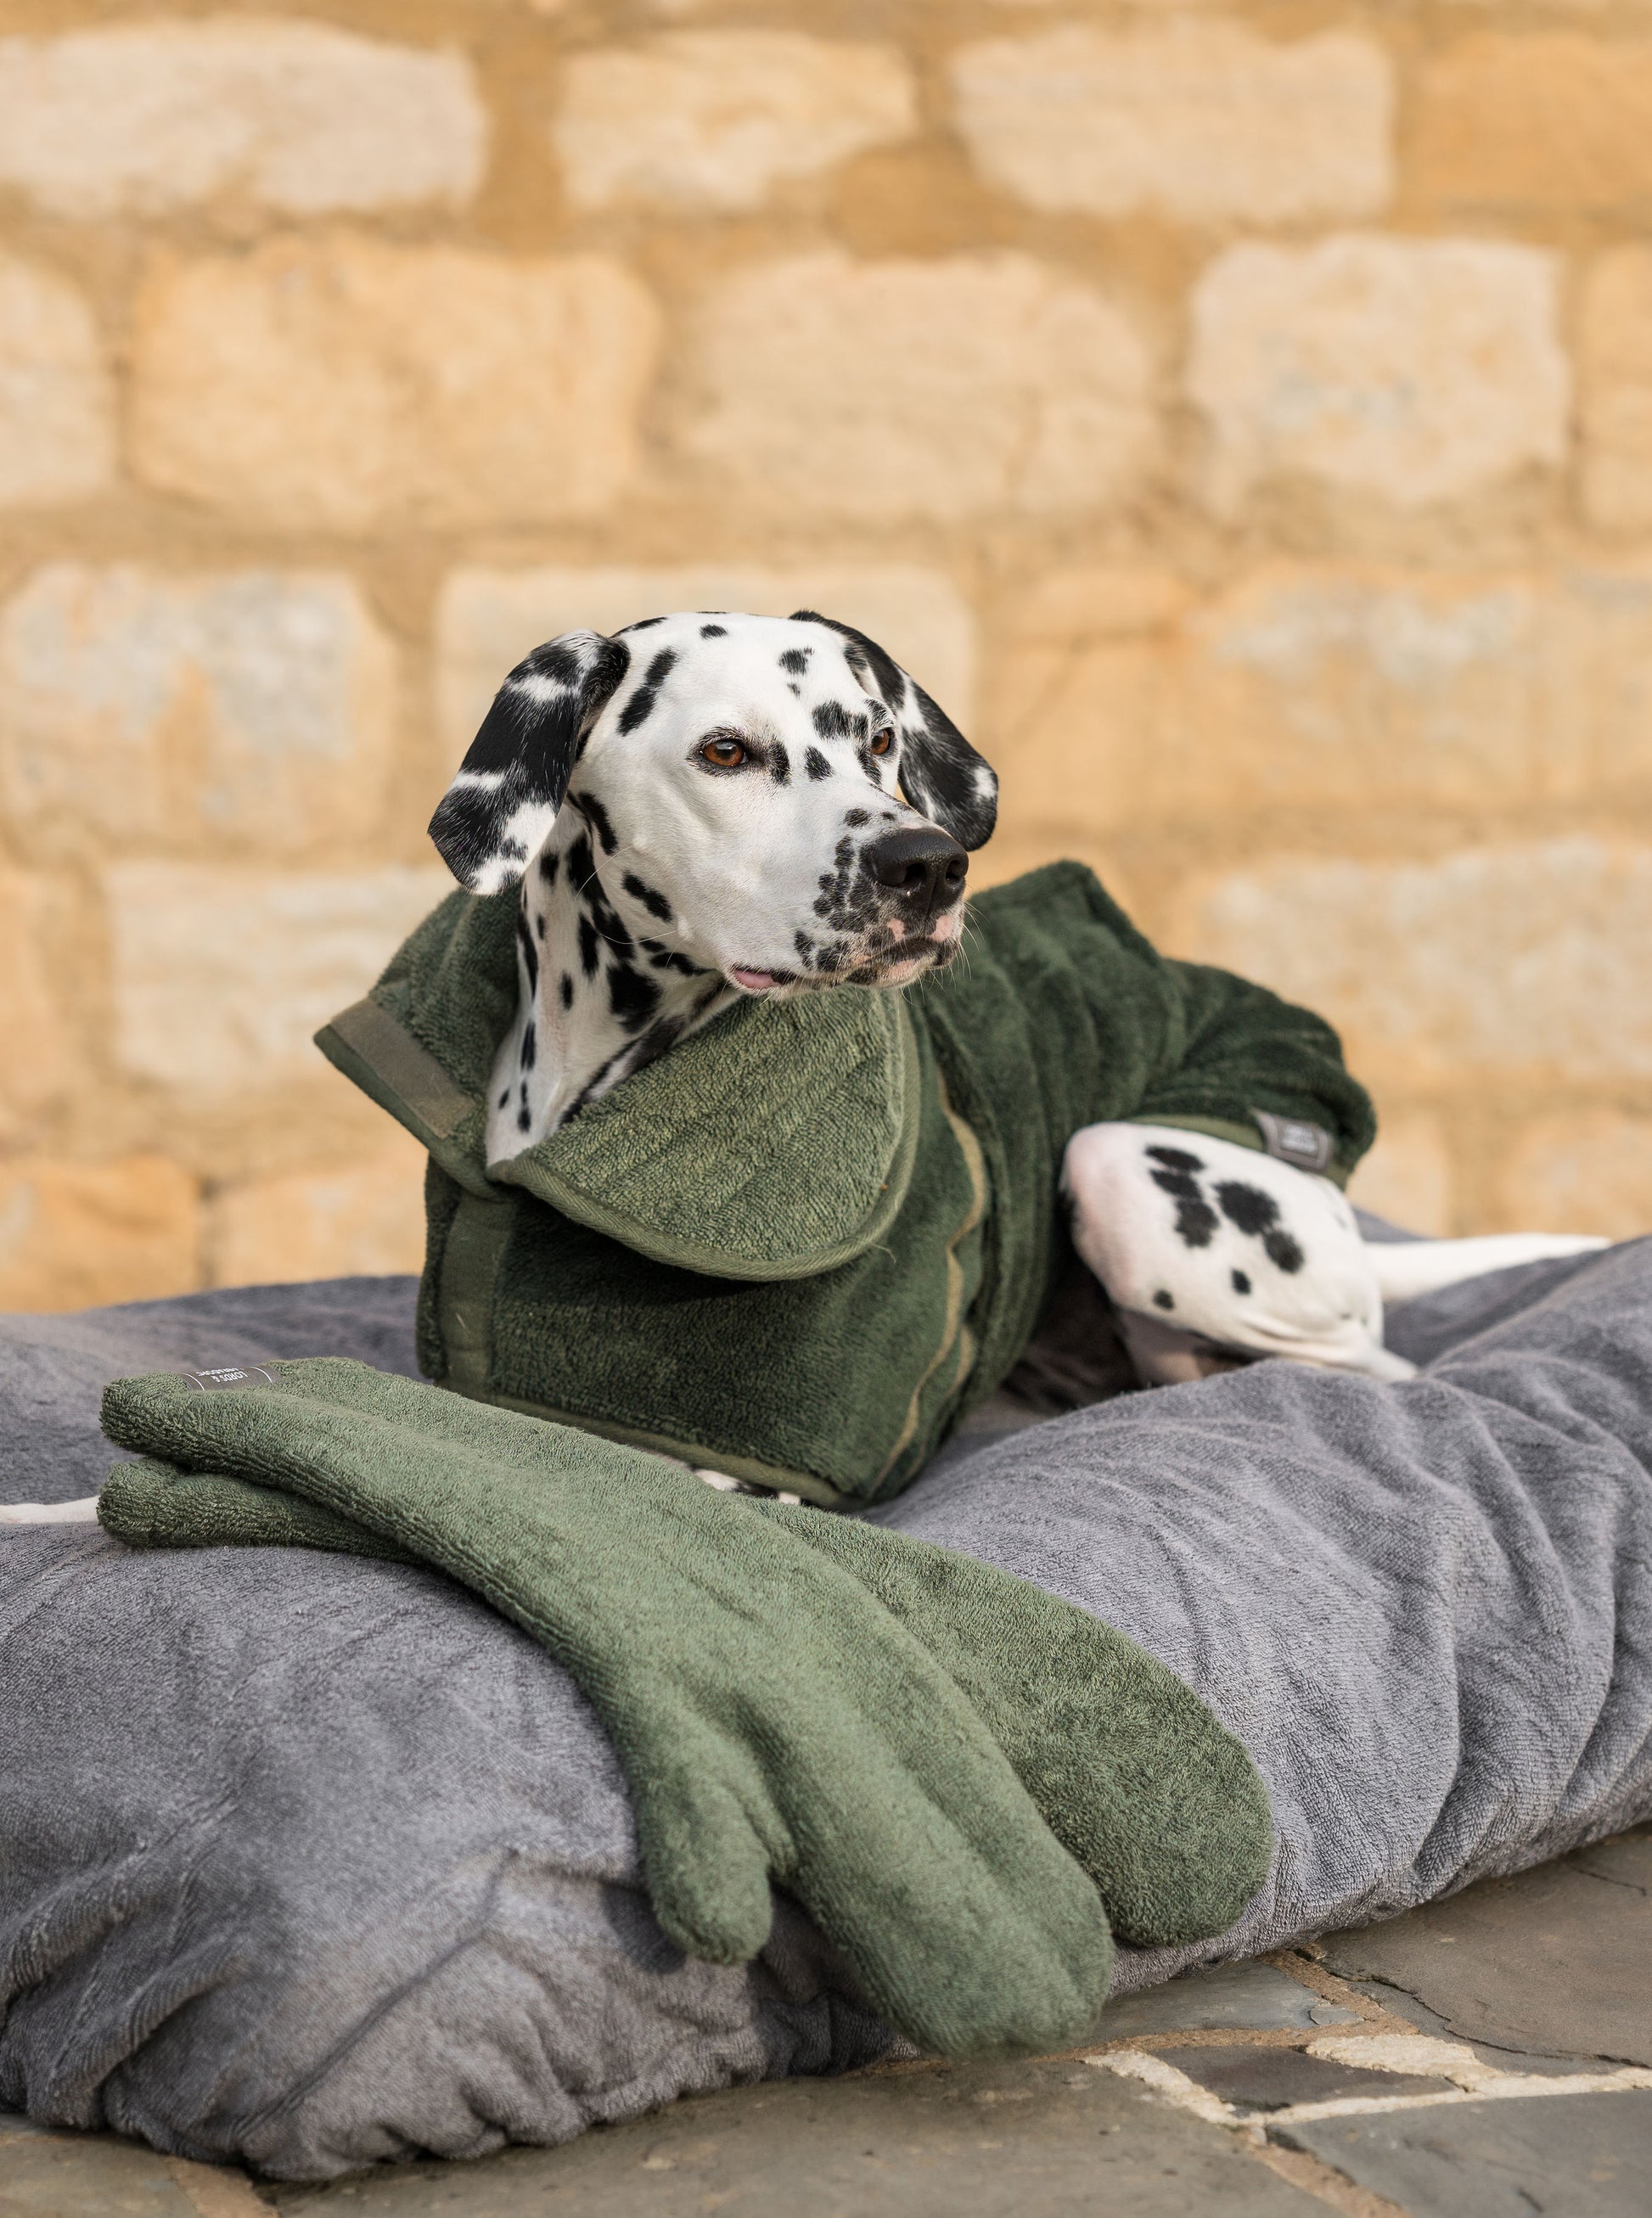 Introducing the ultimate bamboo dog drying mitts in beautiful fir green, made from luxurious bamboo to aid sensitive skin featuring universal size to fit all with super absorbent material for easy pet drying! The perfect dog drying gloves, available now at Lords & Labradors US, In four colors!